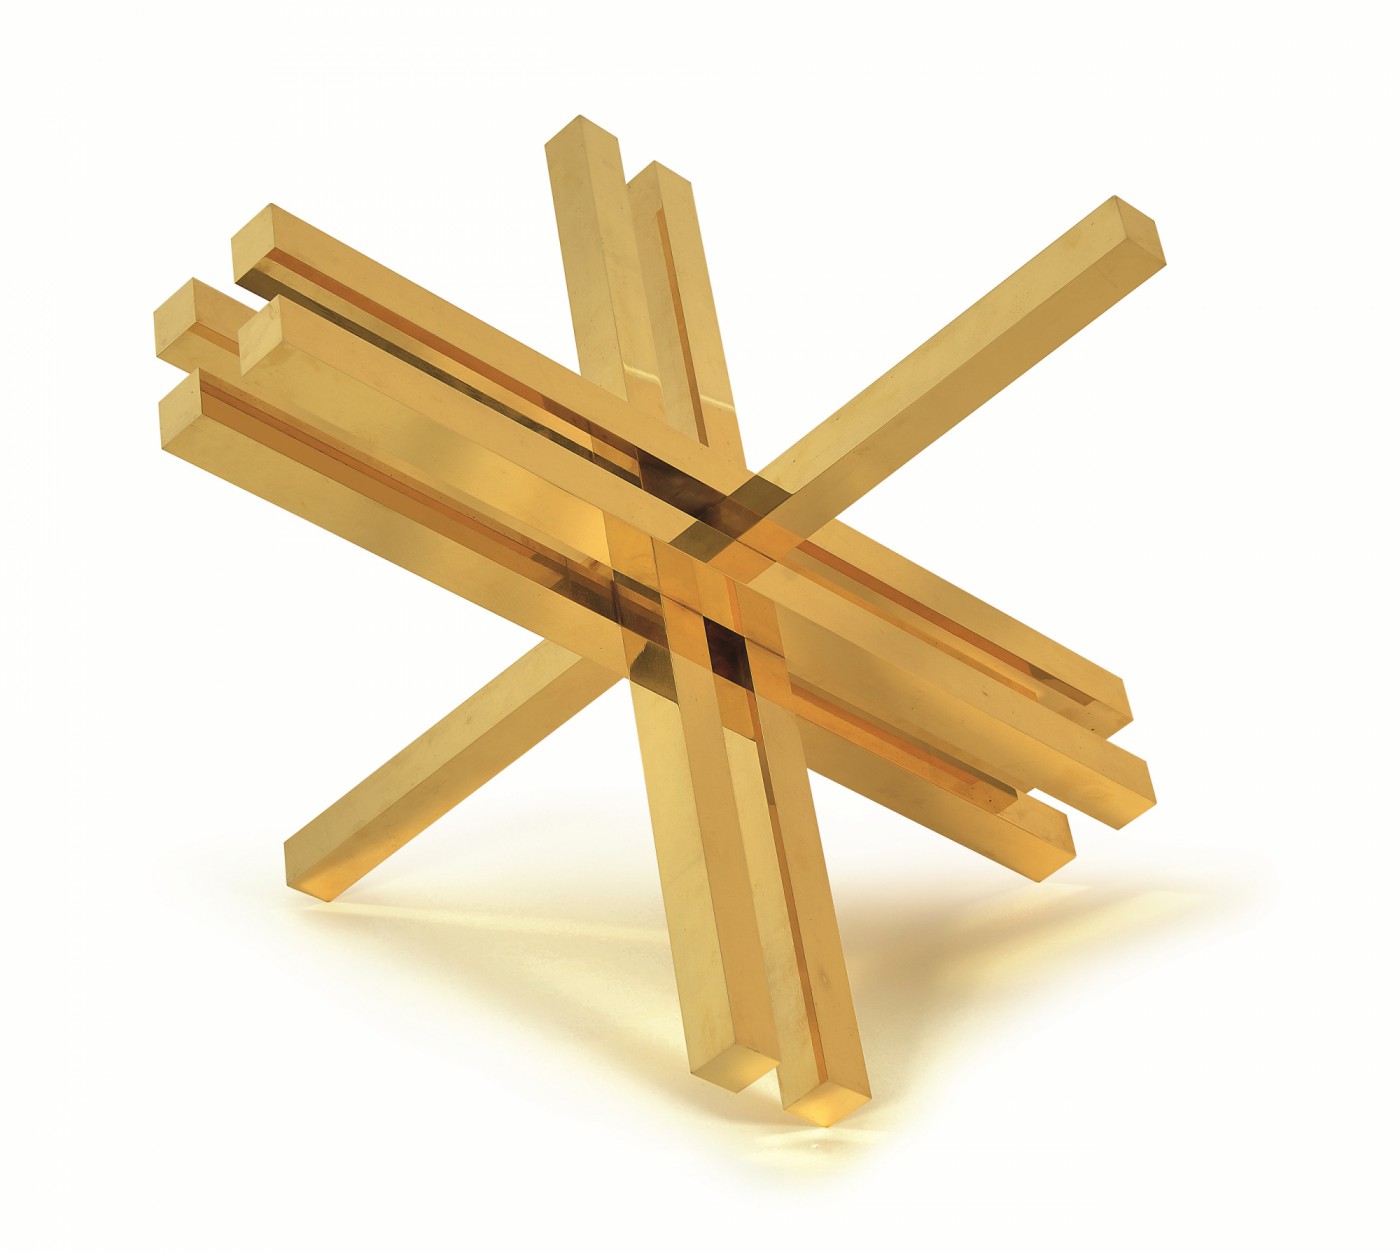 Image of a geometric brass sculpture by Max Bill.